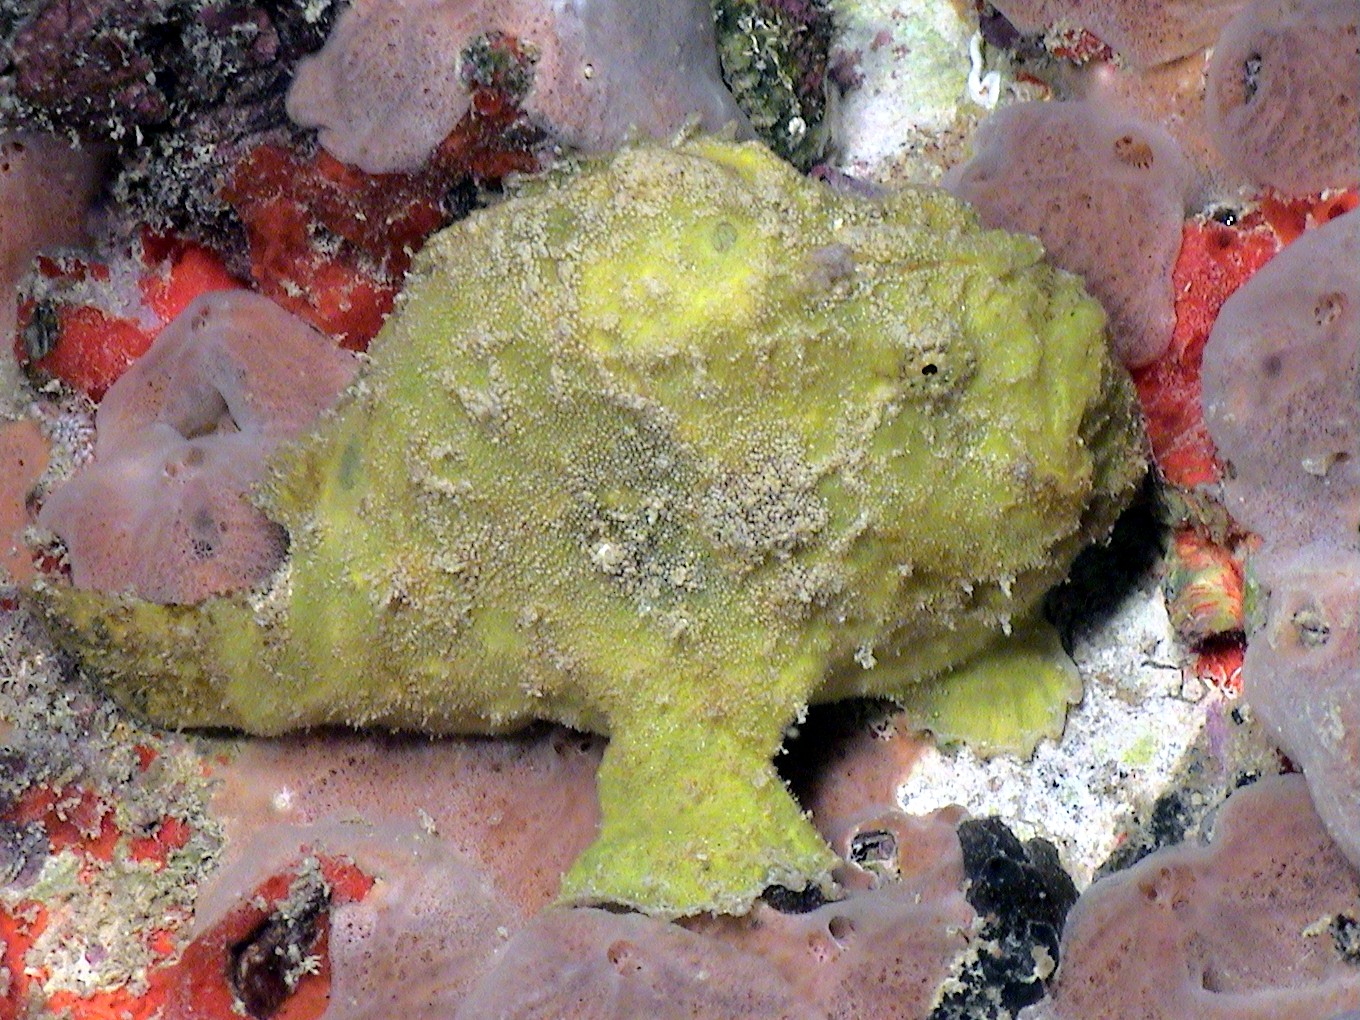 Yellow Frogfish in St. Croix